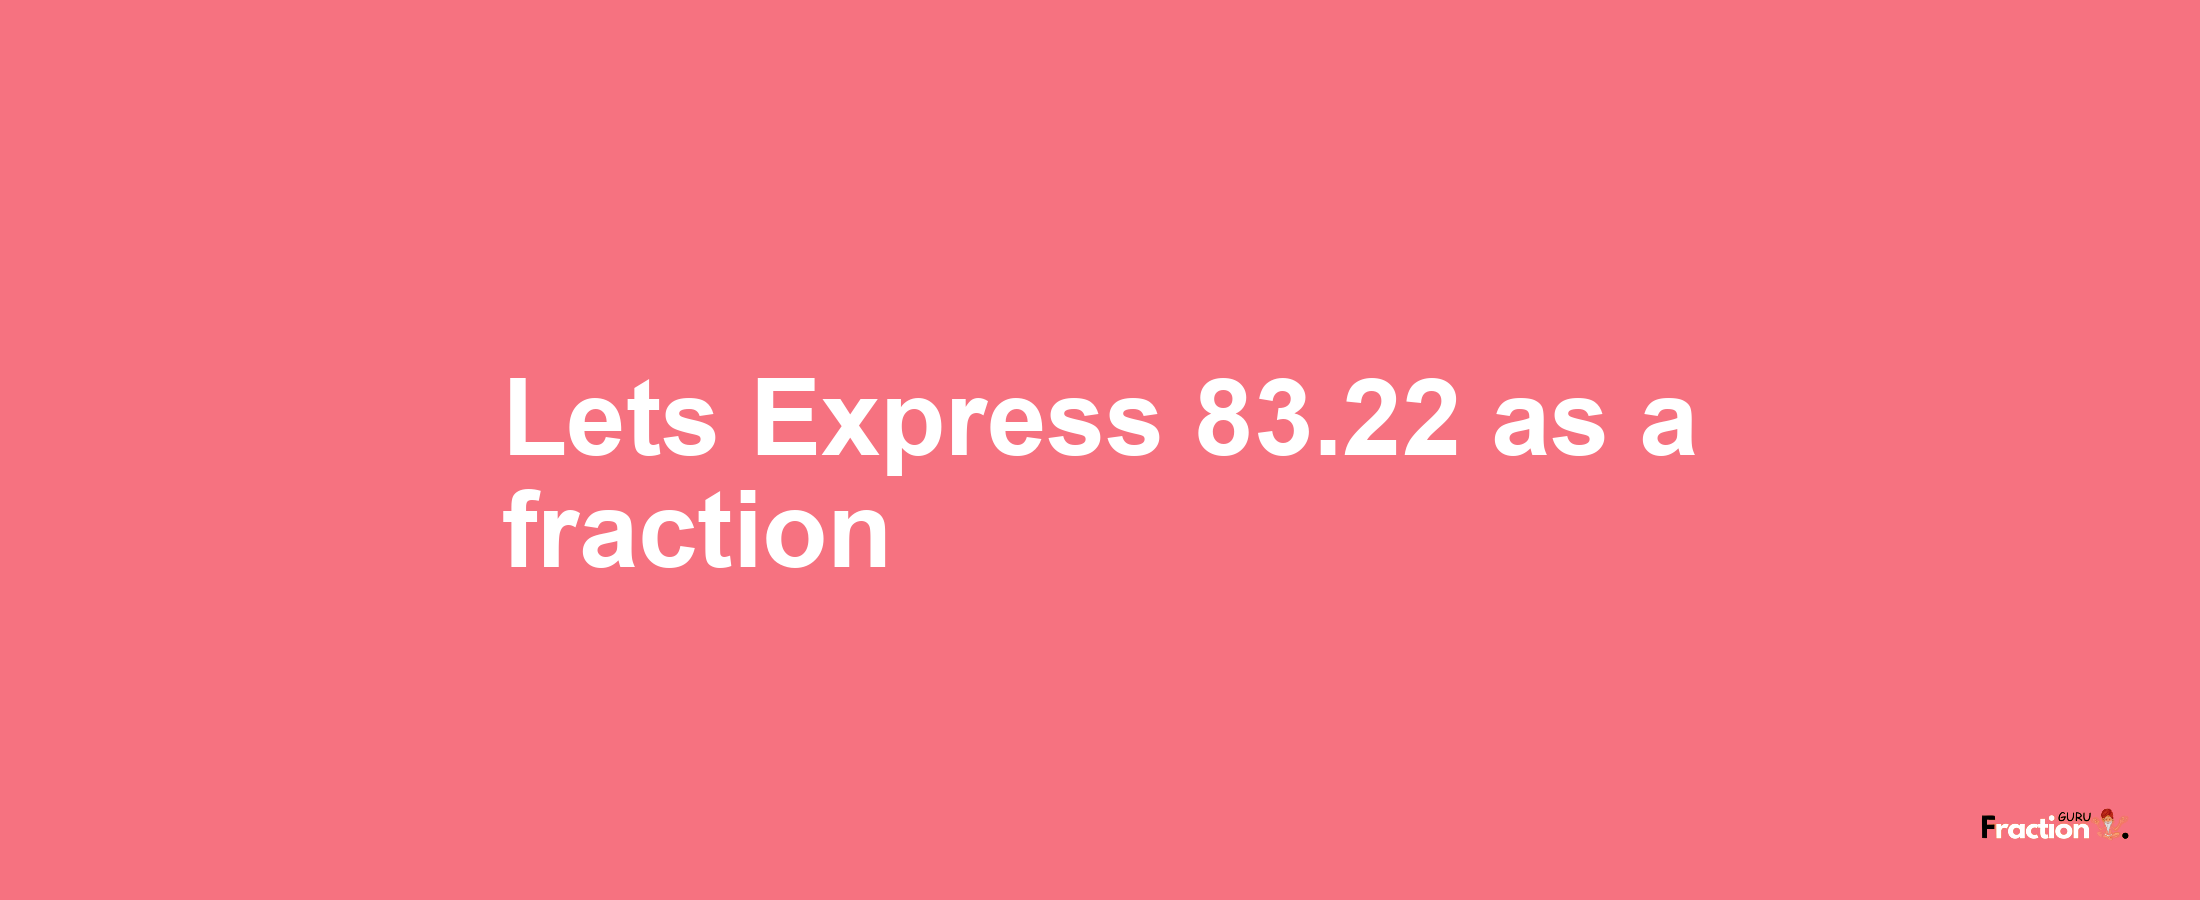 Lets Express 83.22 as afraction